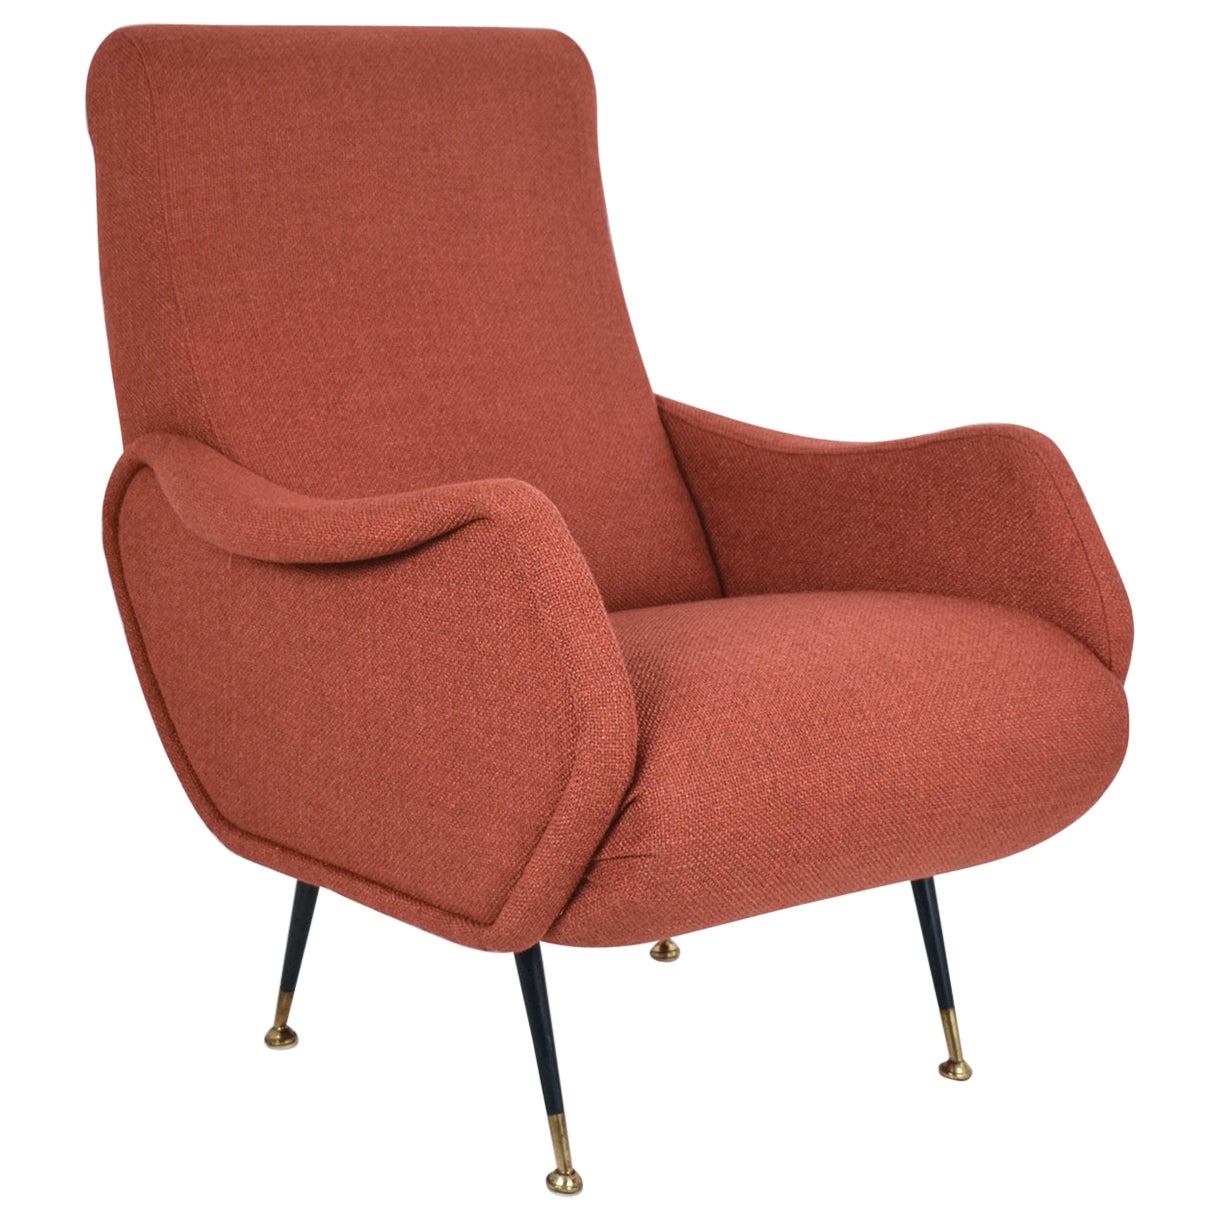 Italian Midcentury Armchair in the Style of Marco Zanuso  , reupholstered 1950's